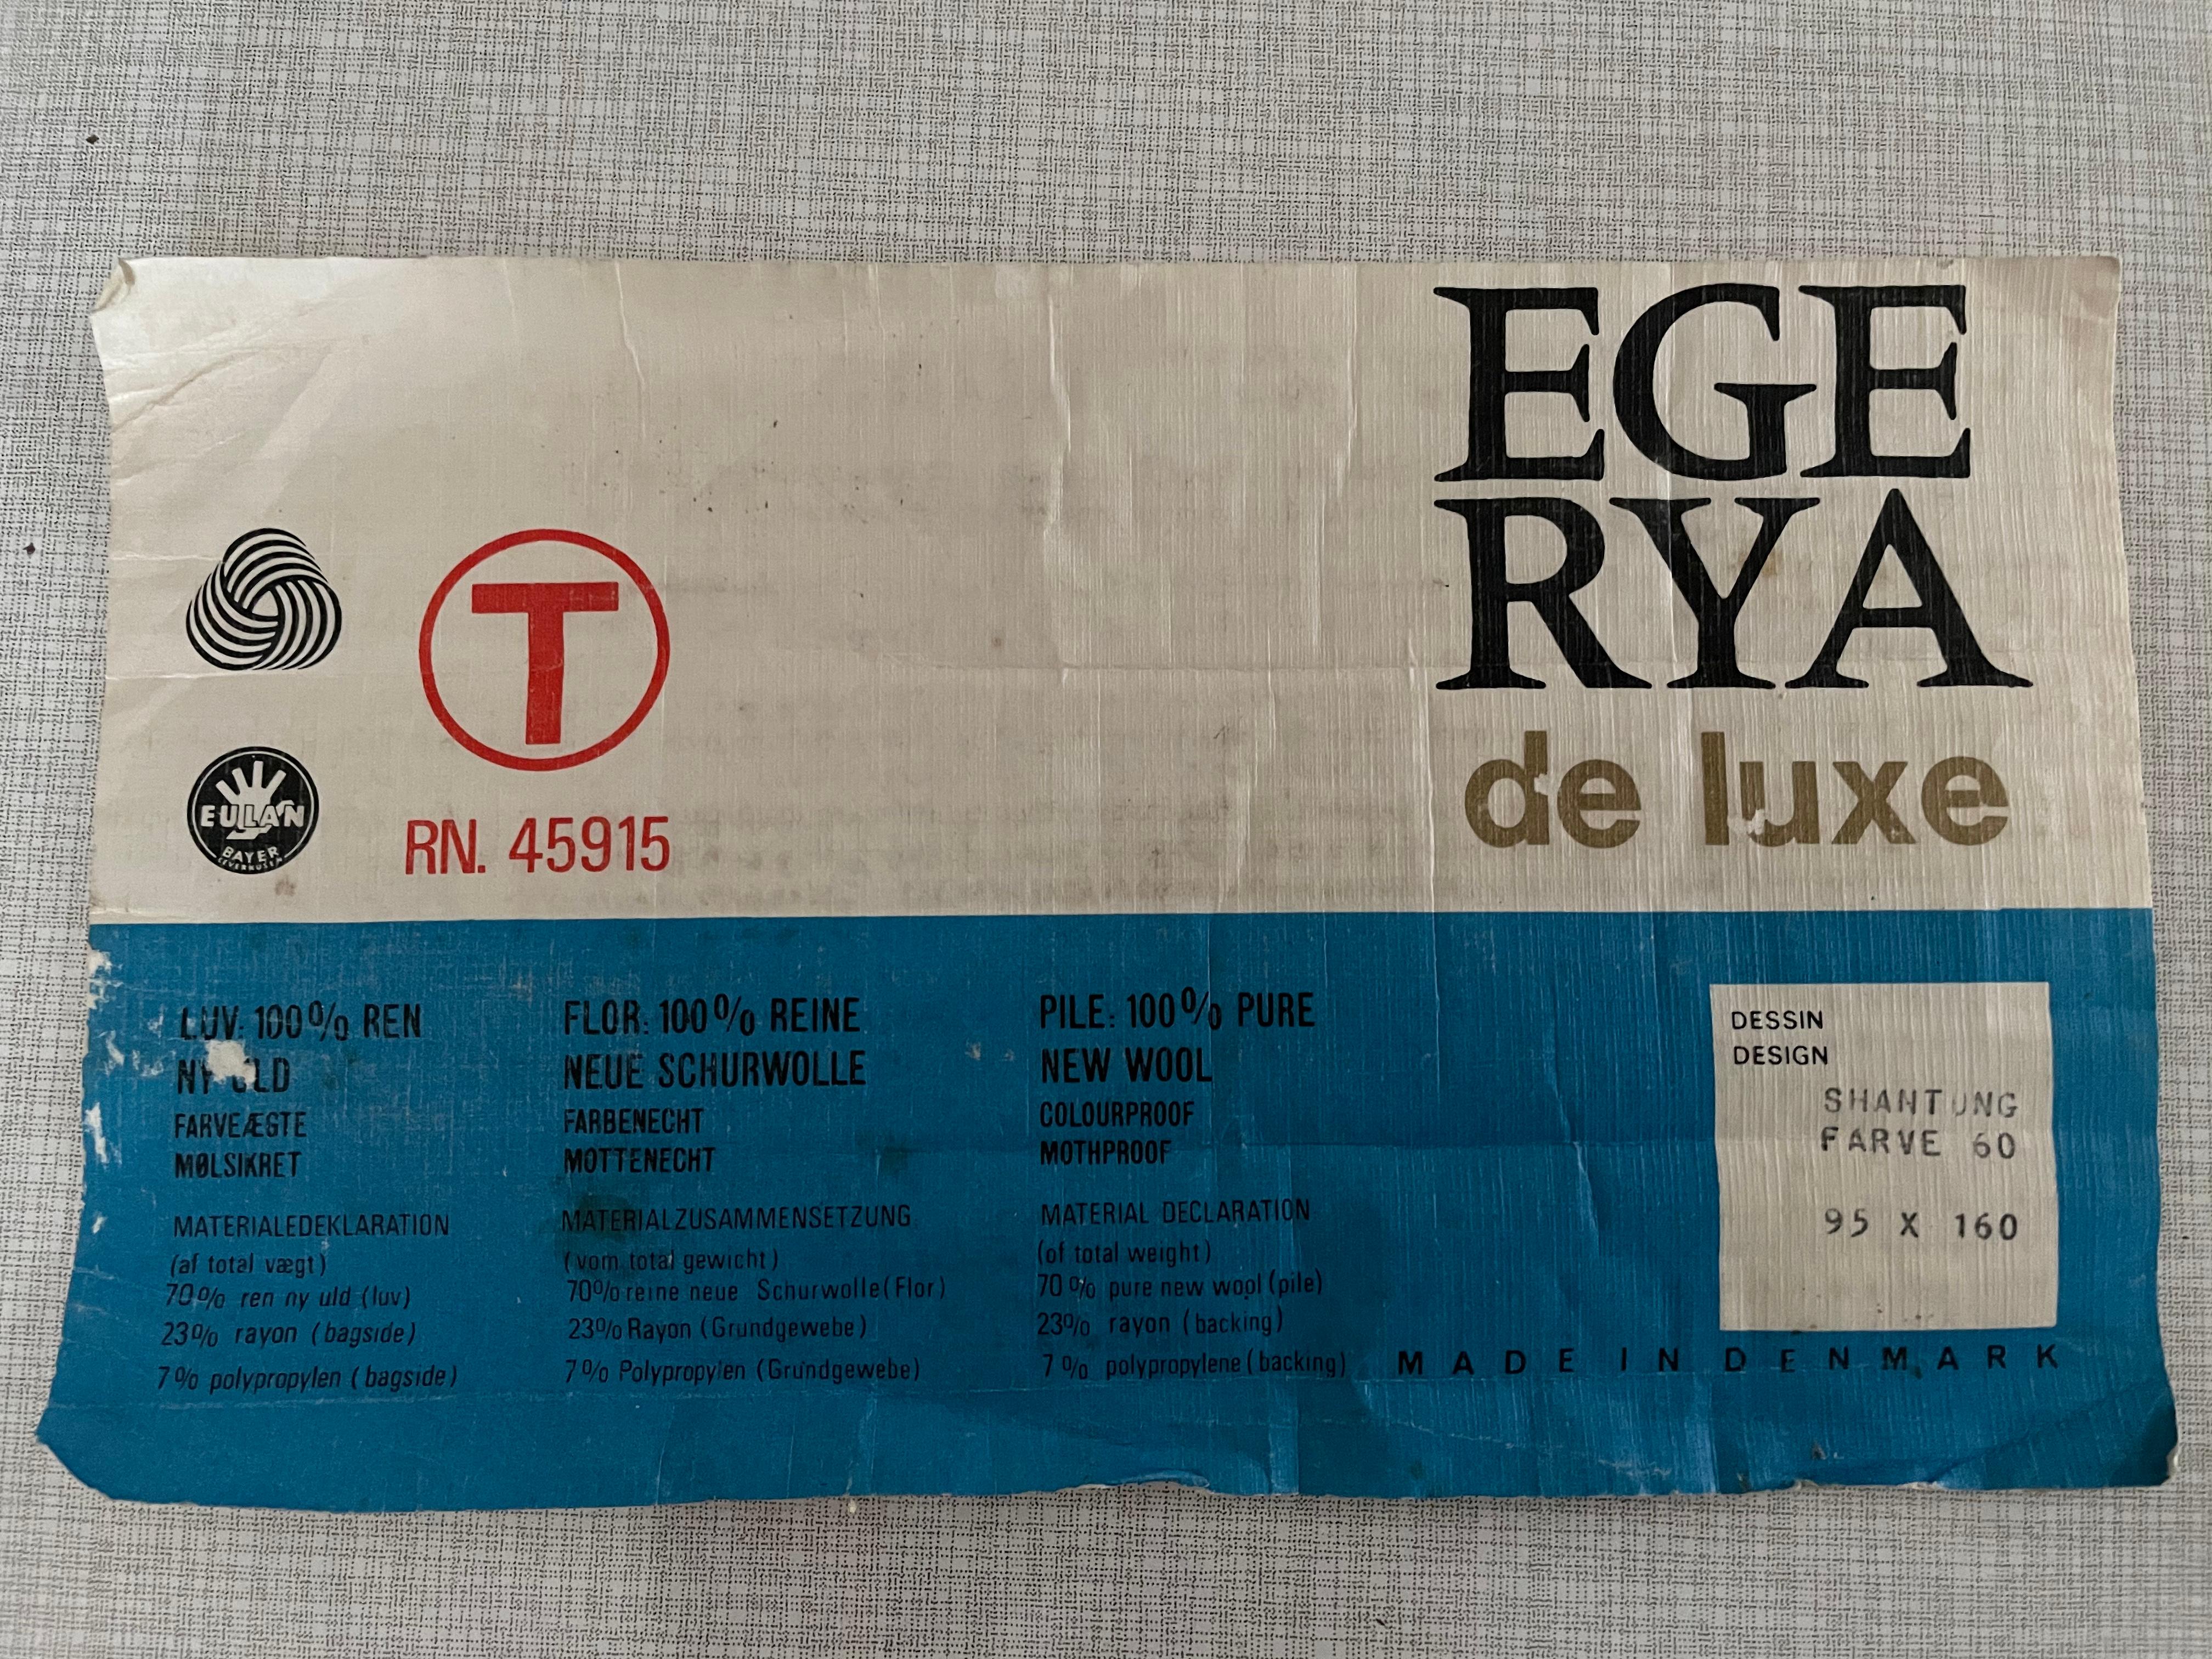 Article:

High pile Rya rug


Decade:

1960s


Producer:

EGE RYA de luxe Taepper, Denmark (see original label)


Material:

100% wool



This rug is a great example of 60s pop art interior. Made in high quality Danish Rya